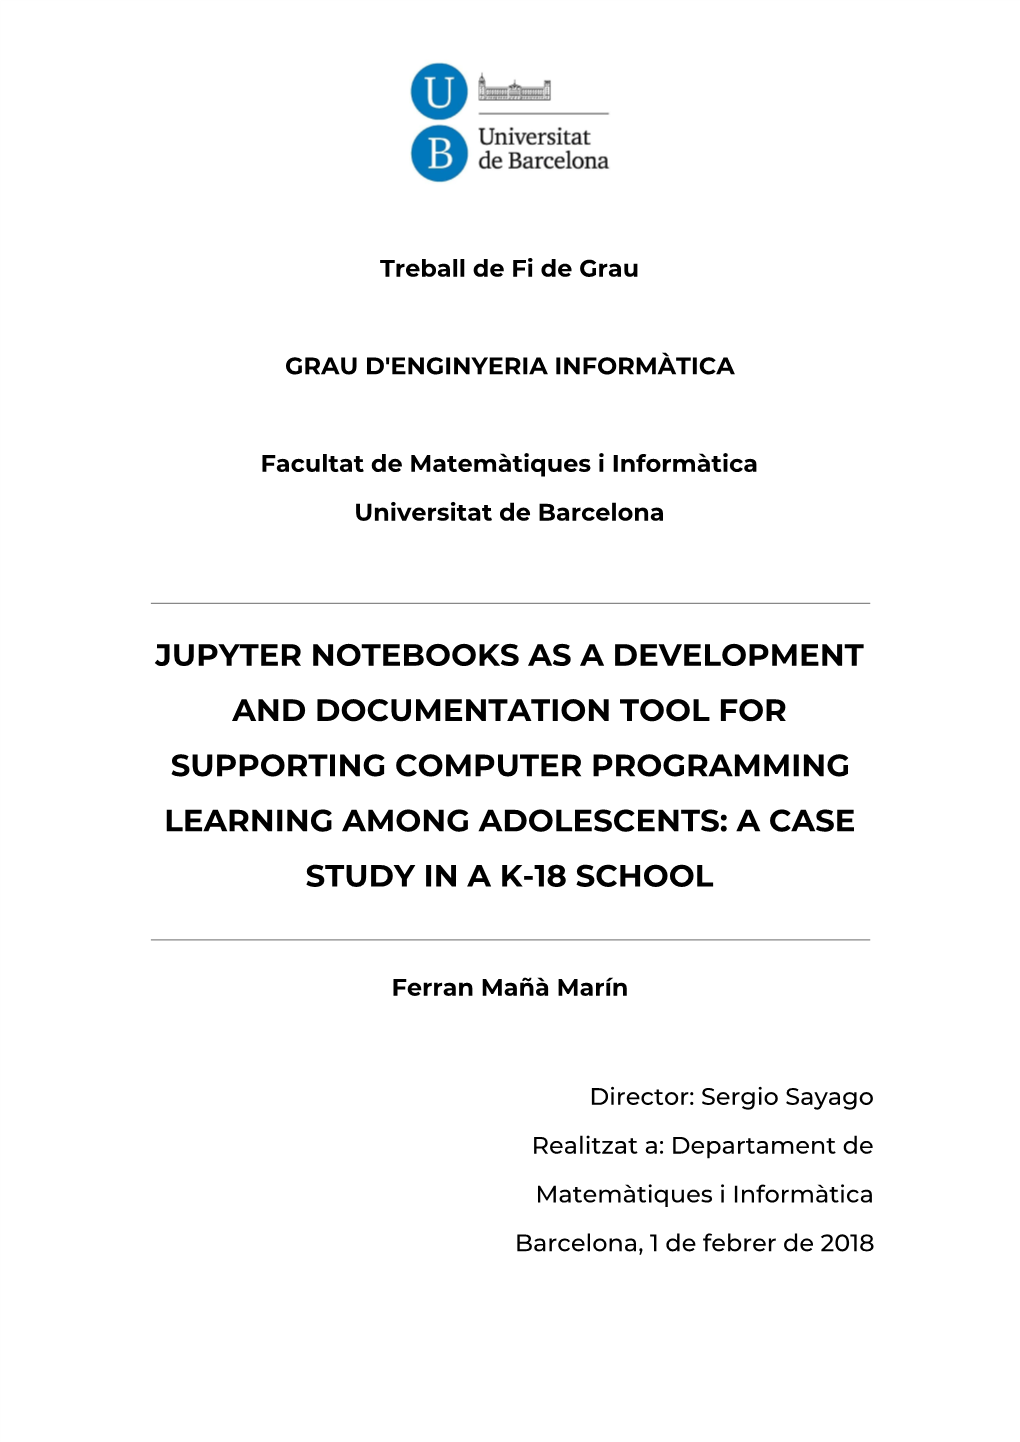 Jupyter Notebooks As a Development and Documentation Tool for Supporting Computer Programming Learning Among Adolescents: a Case Study in a K-18 School